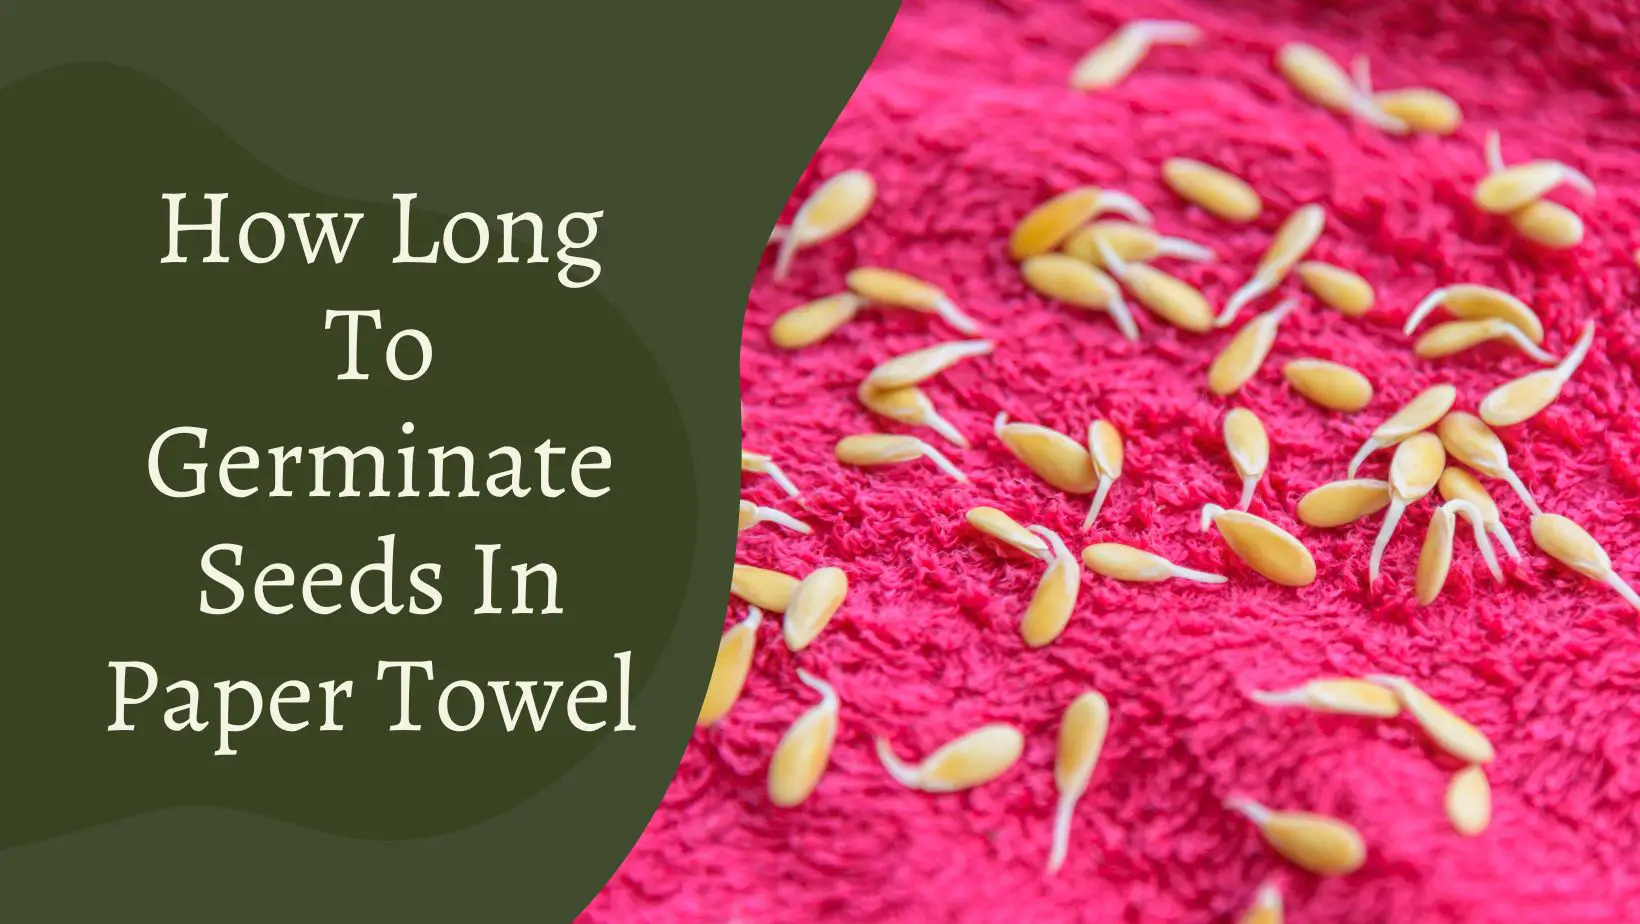 How Long To Germinate Seeds In Paper Towel